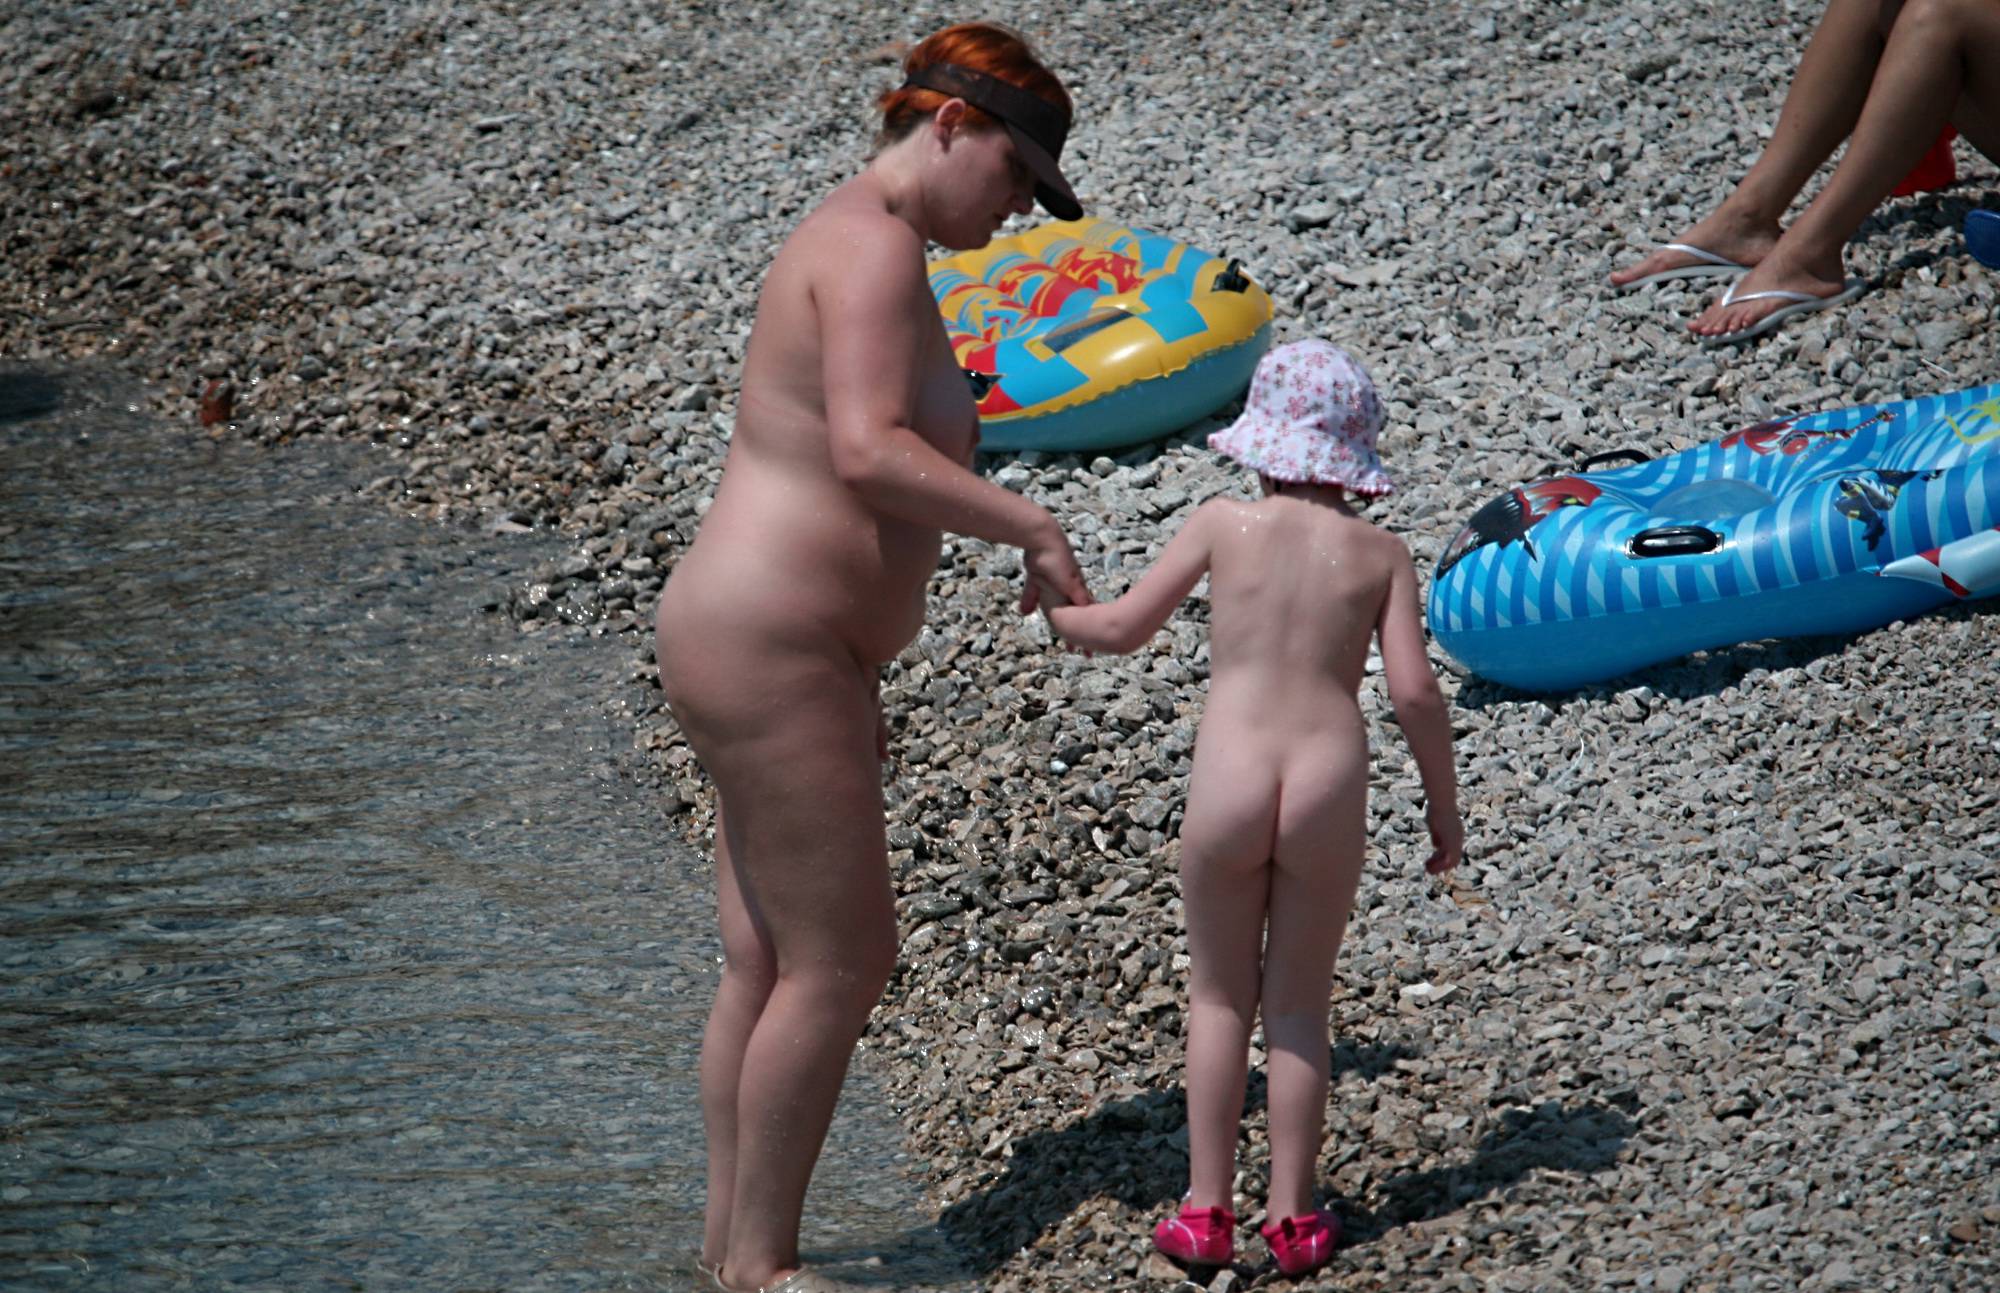 Nude Mother Leading Way - Naturist Family - 1